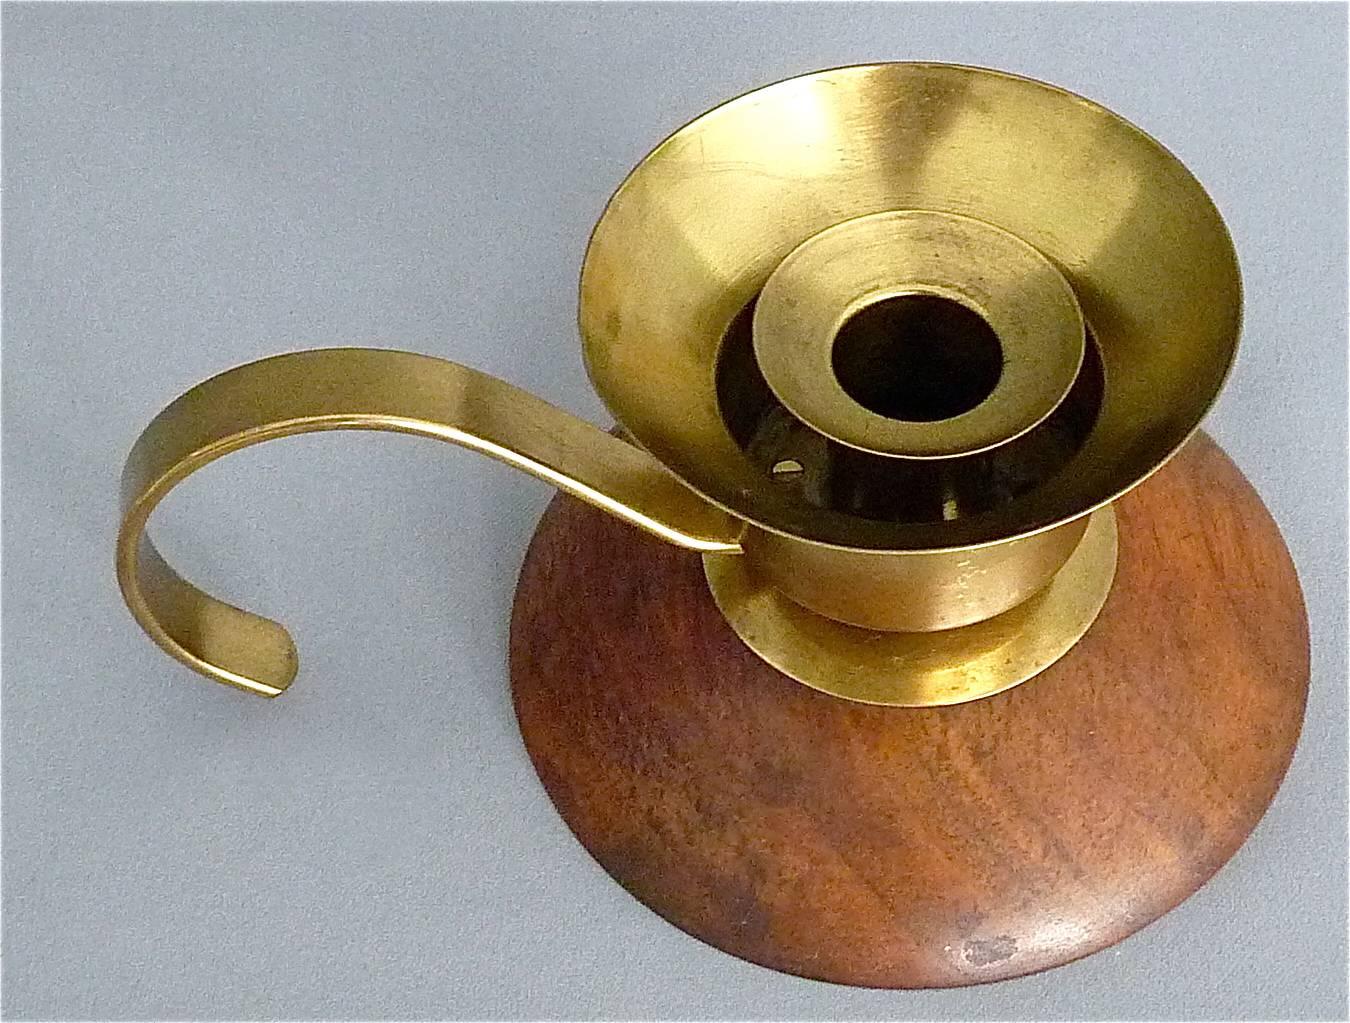 Rare authentic brass and wood candleholder light designed by Marianne Brandt, circa 1929-1932 and which was manufactured by Ruppel Werke, Gotha in Germany. The candleholder is 7.5 cm / 2.95 inches tall and has a width at the wood base of 12.2 cm /